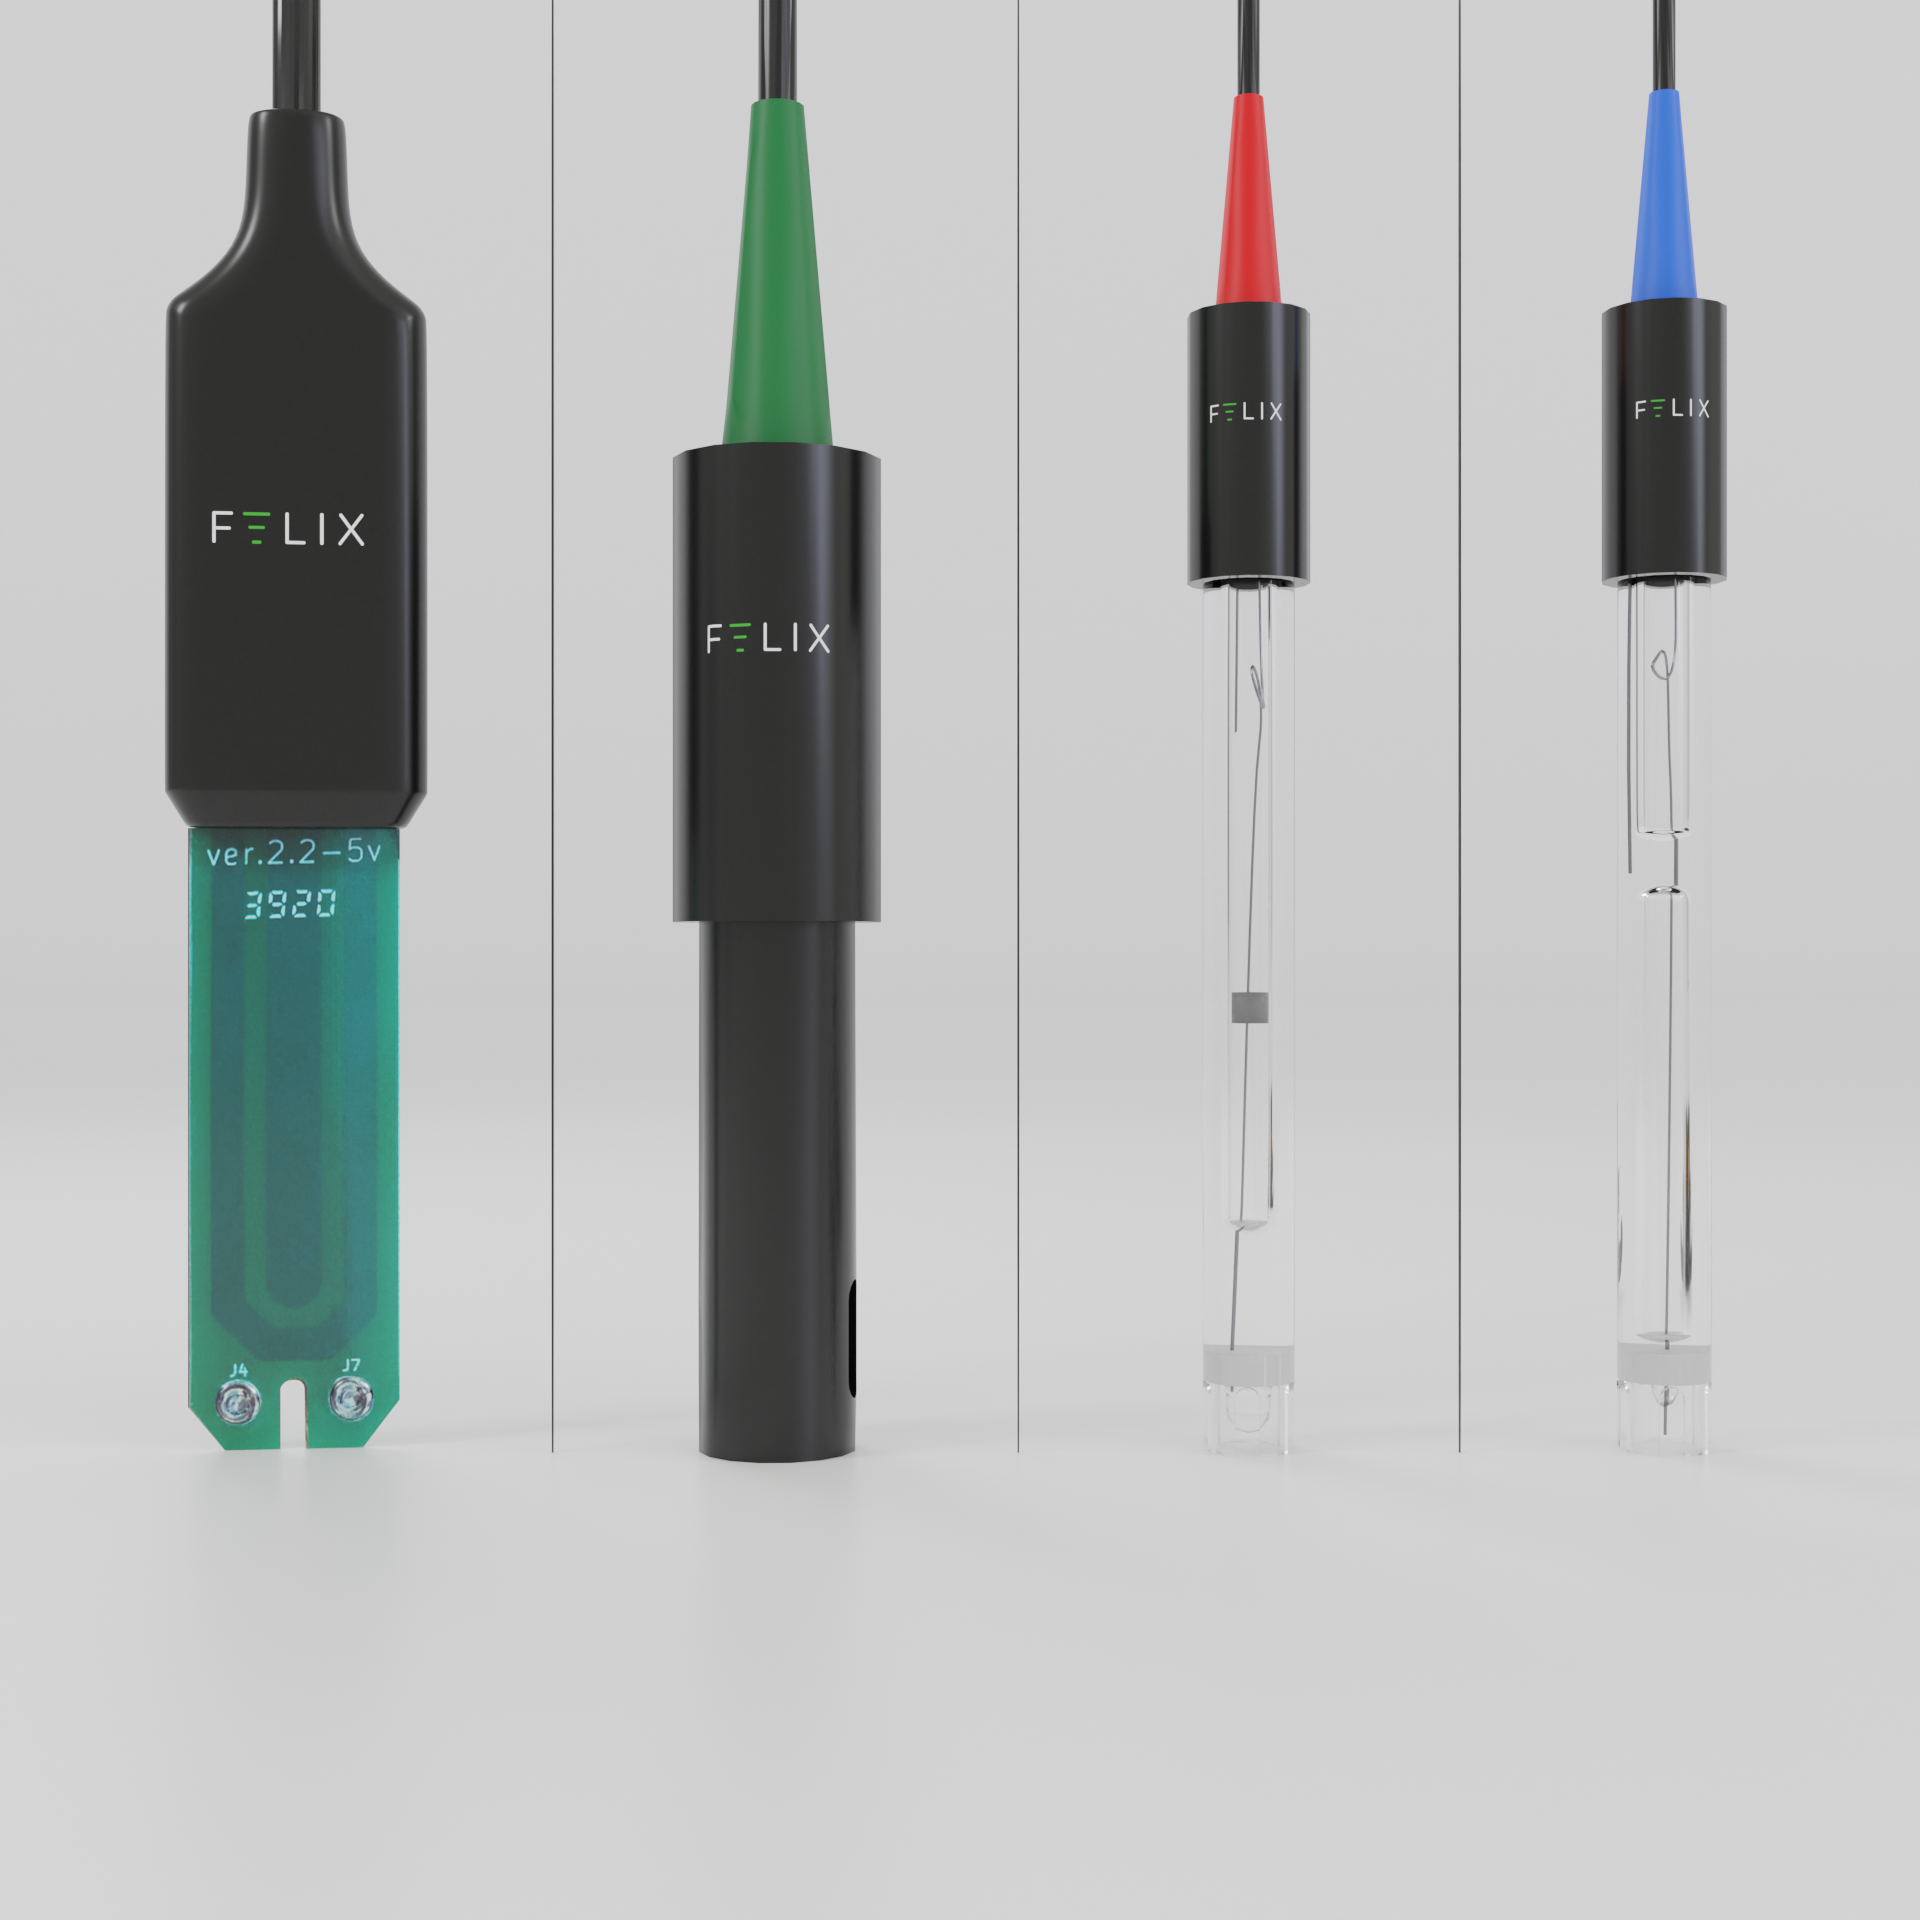 The Felix Smart Moisture and Temperature Probe is shown, next to the Felix Smart Conductivity Probe, the Felix Smart pH Water Probe, and the Felix Smart ORP Probe.